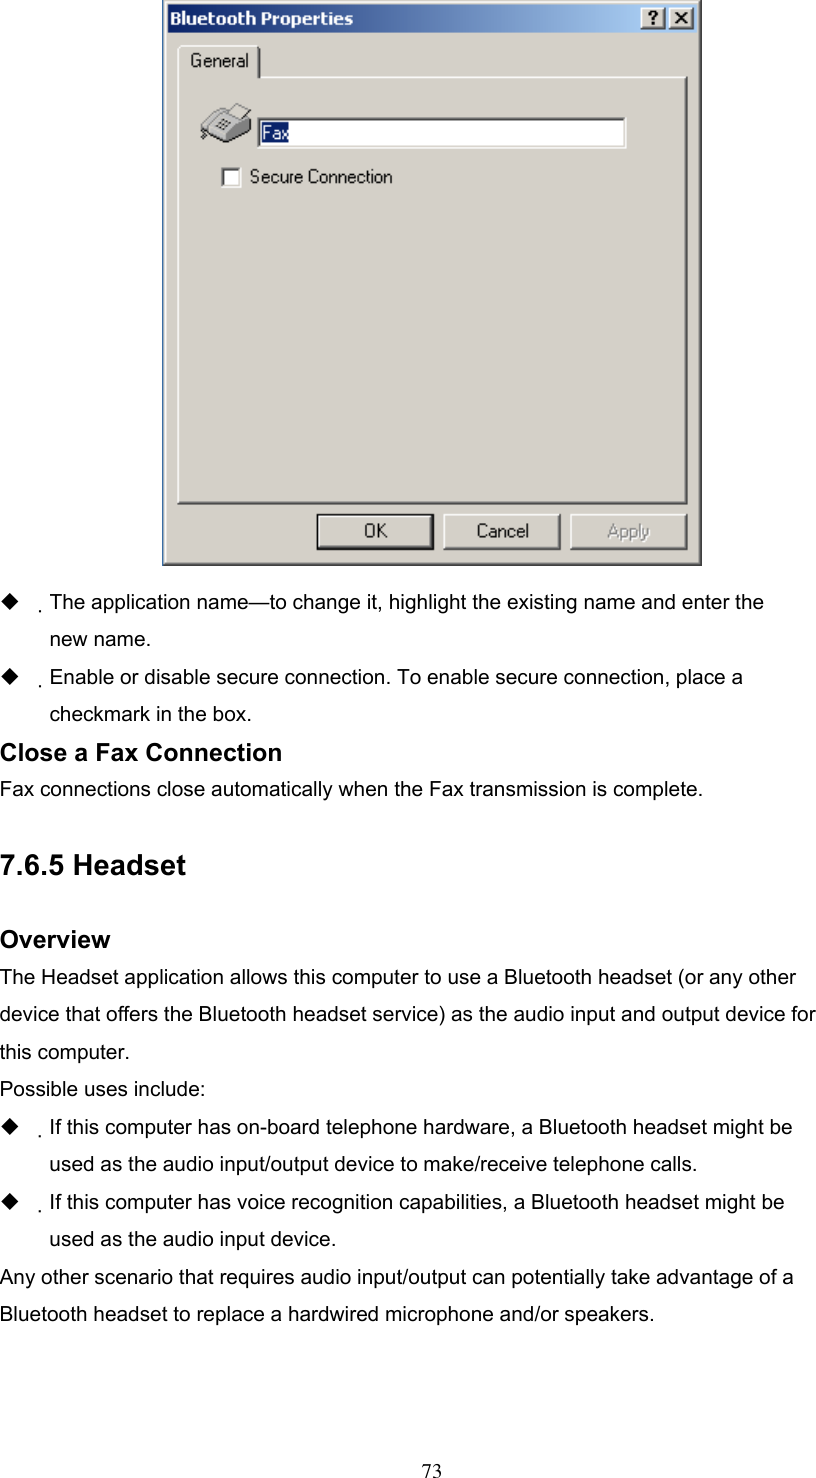    The application name—to change it, highlight the existing name and enter the new name.   Enable or disable secure connection. To enable secure connection, place a checkmark in the box. Close a Fax Connection Fax connections close automatically when the Fax transmission is complete.  7.6.5 Headset  Overview The Headset application allows this computer to use a Bluetooth headset (or any other device that offers the Bluetooth headset service) as the audio input and output device for this computer. Possible uses include:   If this computer has on-board telephone hardware, a Bluetooth headset might be used as the audio input/output device to make/receive telephone calls.   If this computer has voice recognition capabilities, a Bluetooth headset might be used as the audio input device. Any other scenario that requires audio input/output can potentially take advantage of a Bluetooth headset to replace a hardwired microphone and/or speakers.    73 